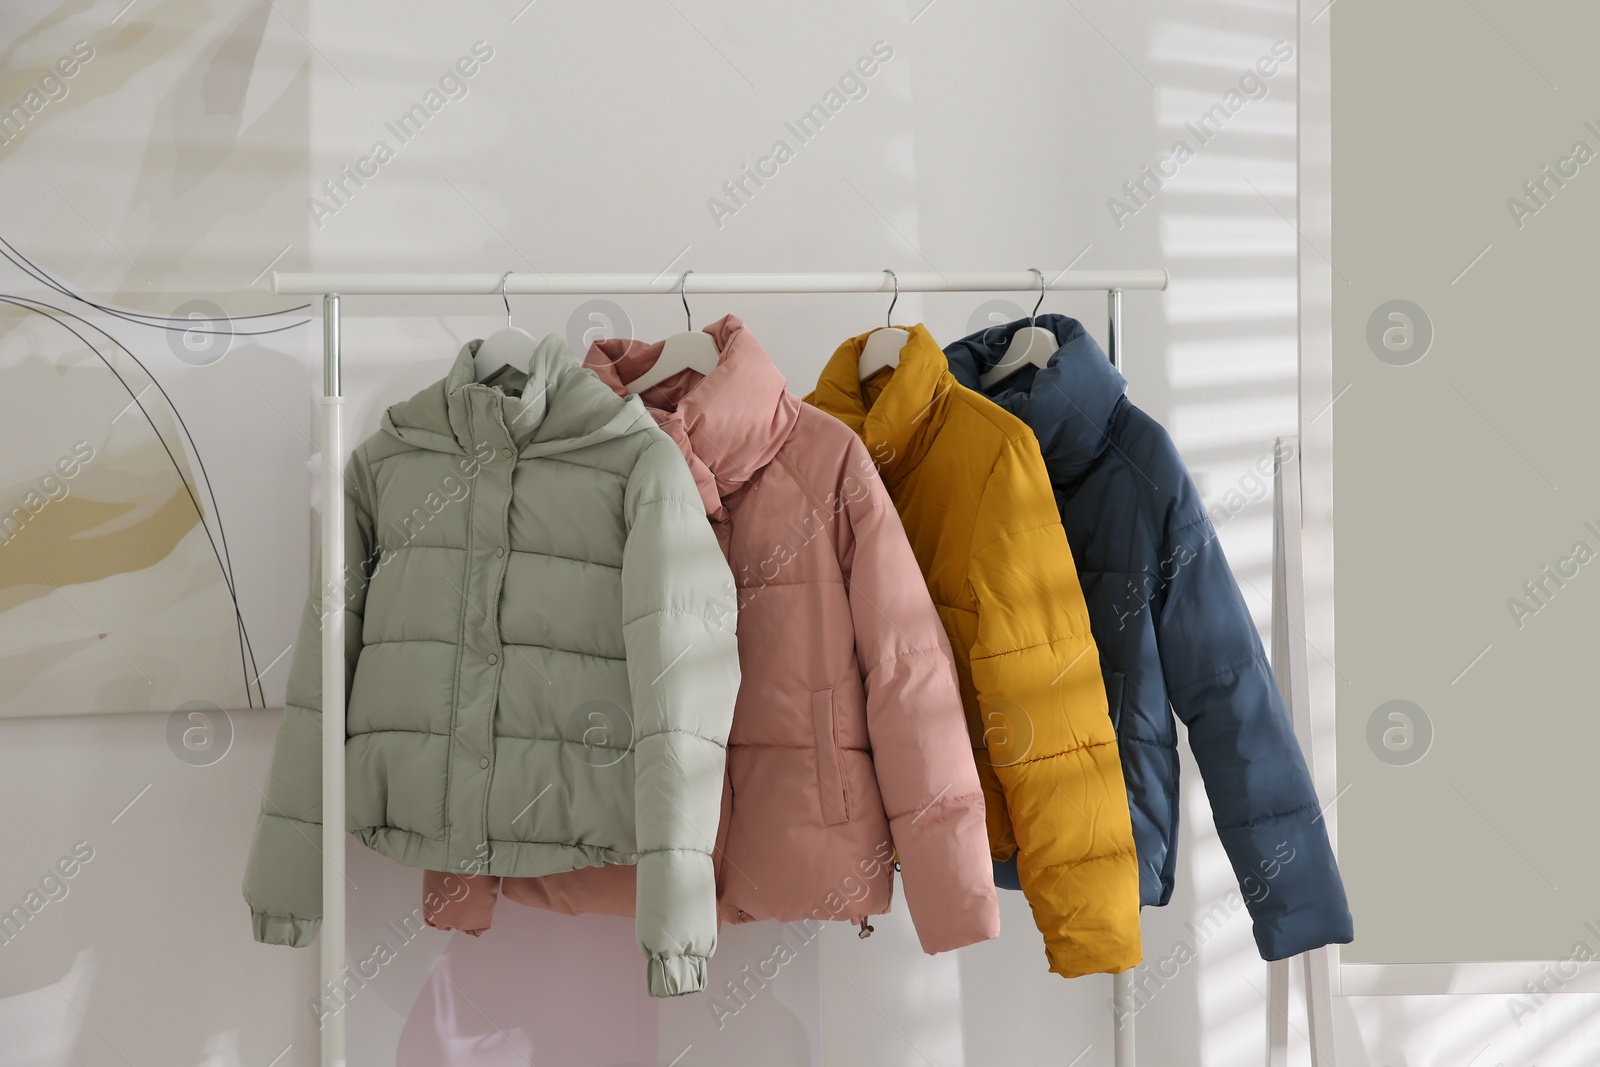 Photo of Different warm jackets hanging on rack indoors